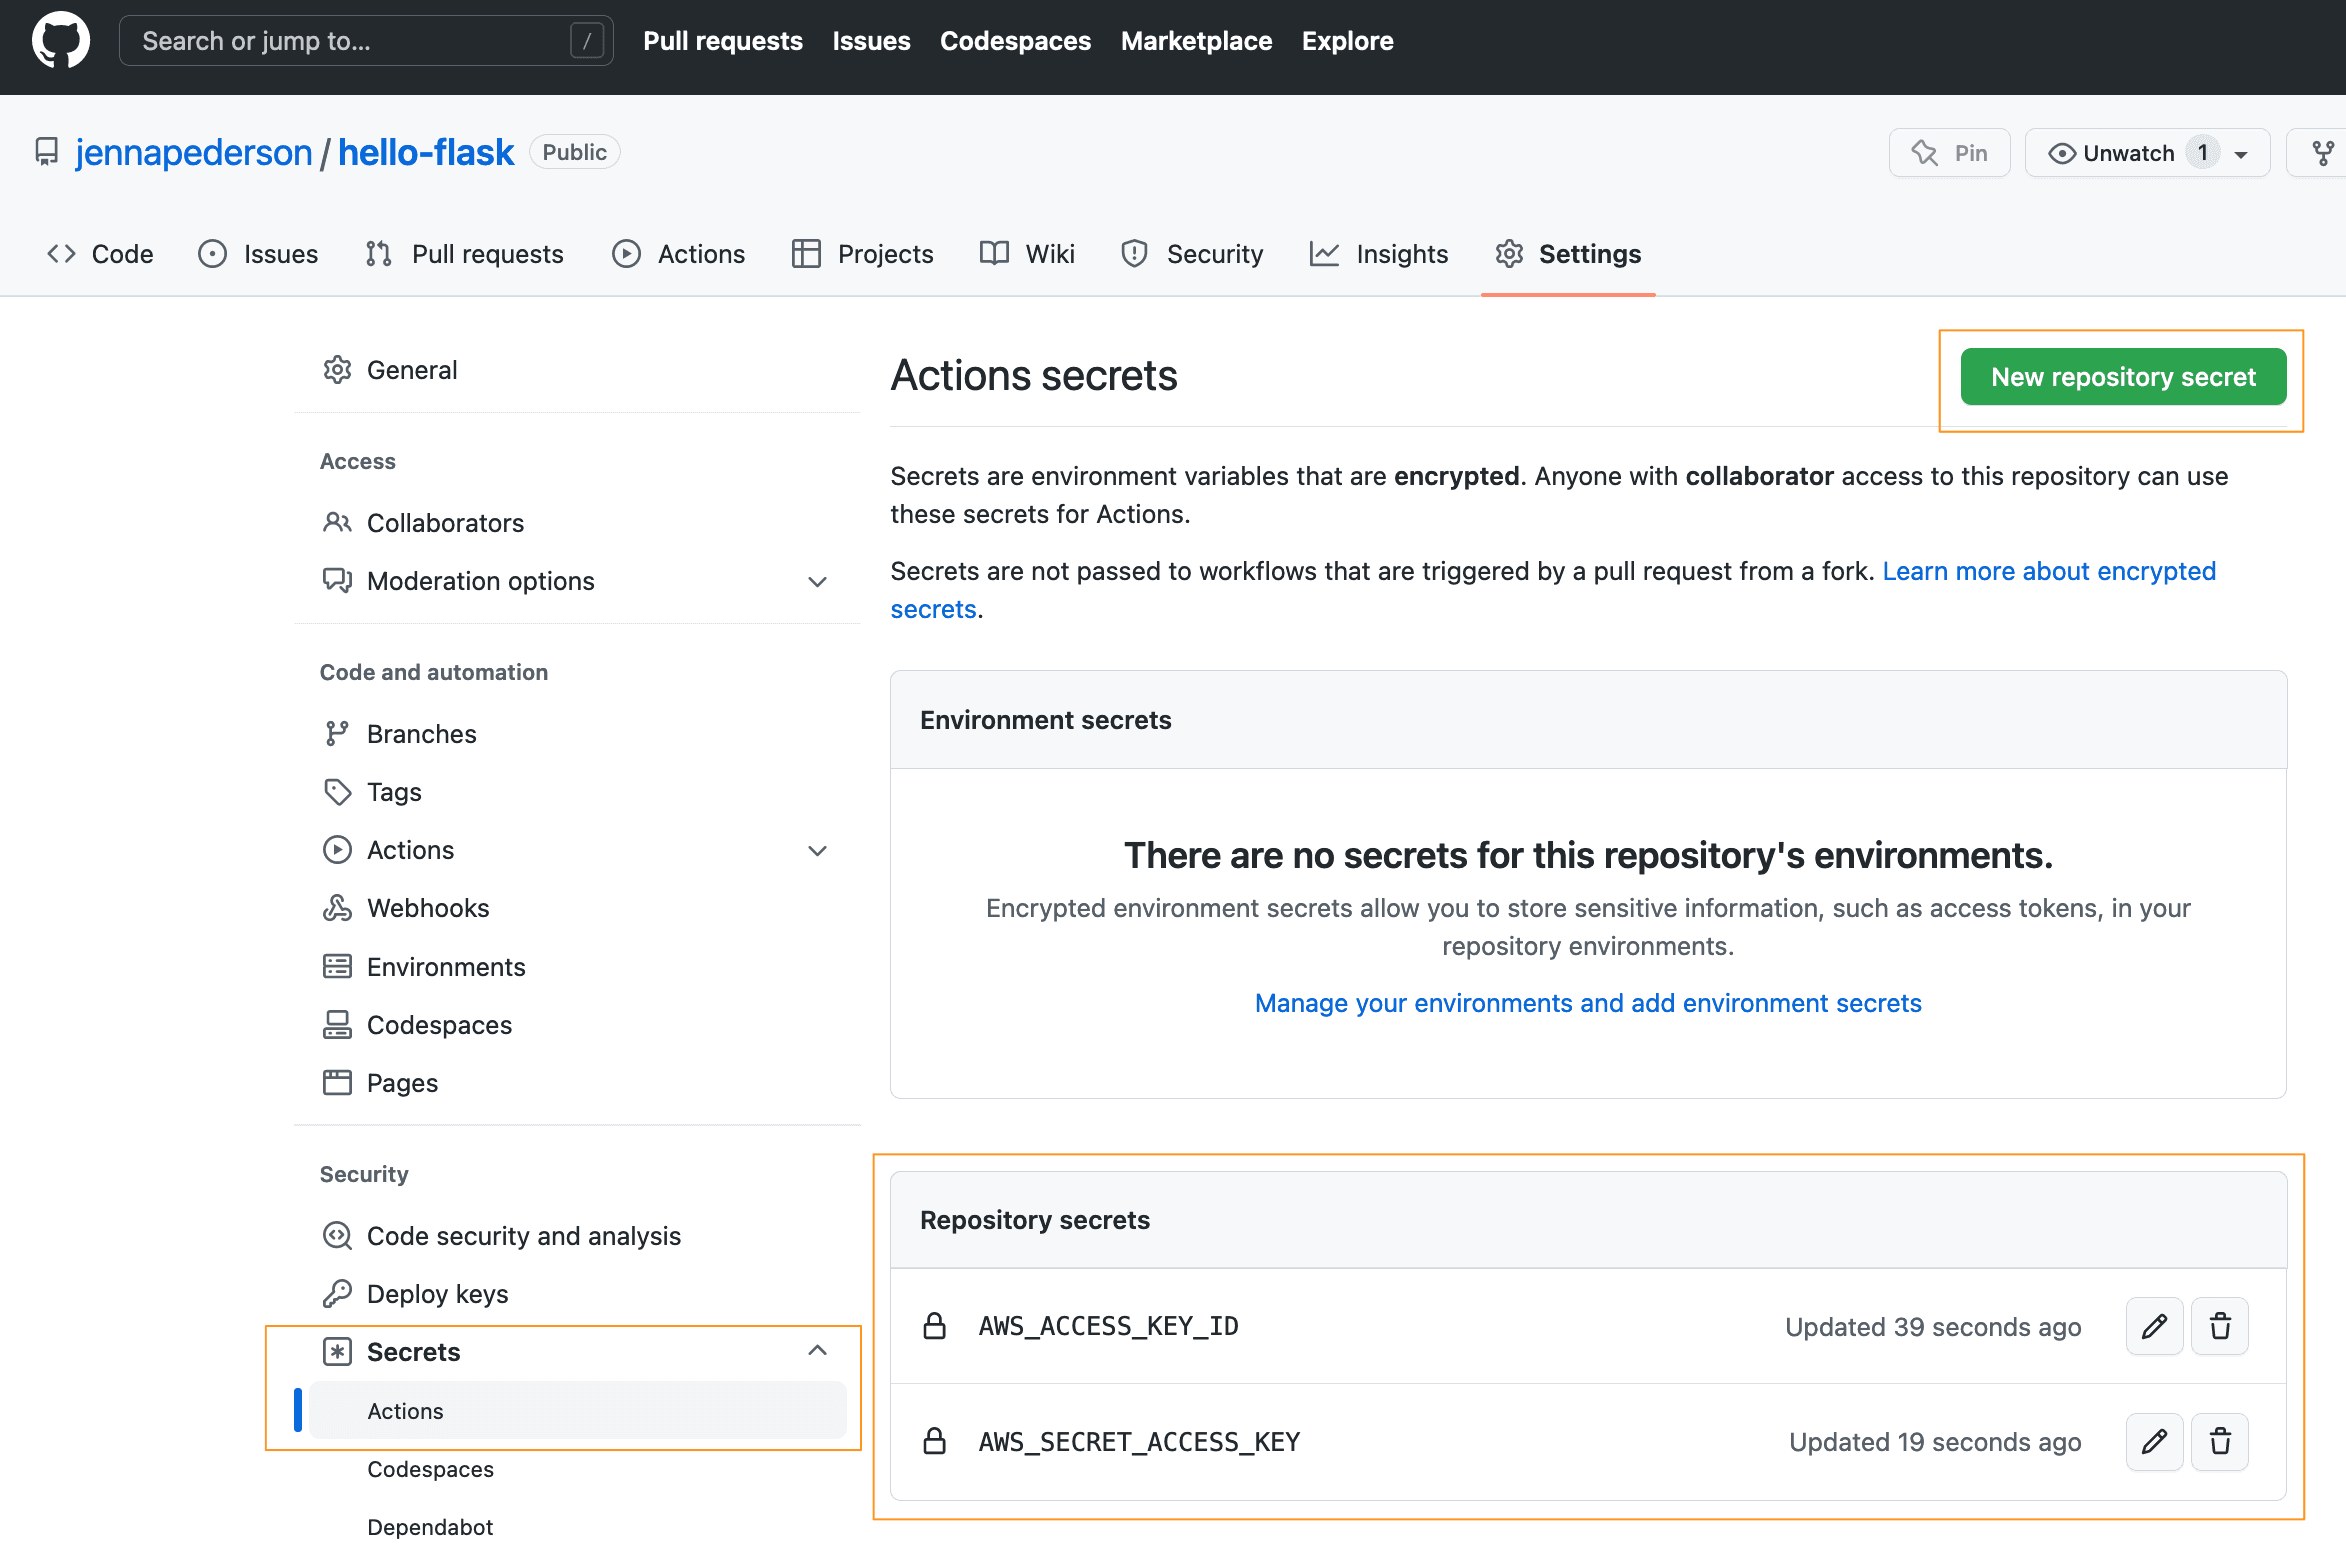 Shows the Settings tab of the  GitHub repo, highlighting the Secrets-Actions menu item and the two new repository secrets, AWS_ACCESS_KEY_ID and AWS_SECRET_ACCESS_KEY